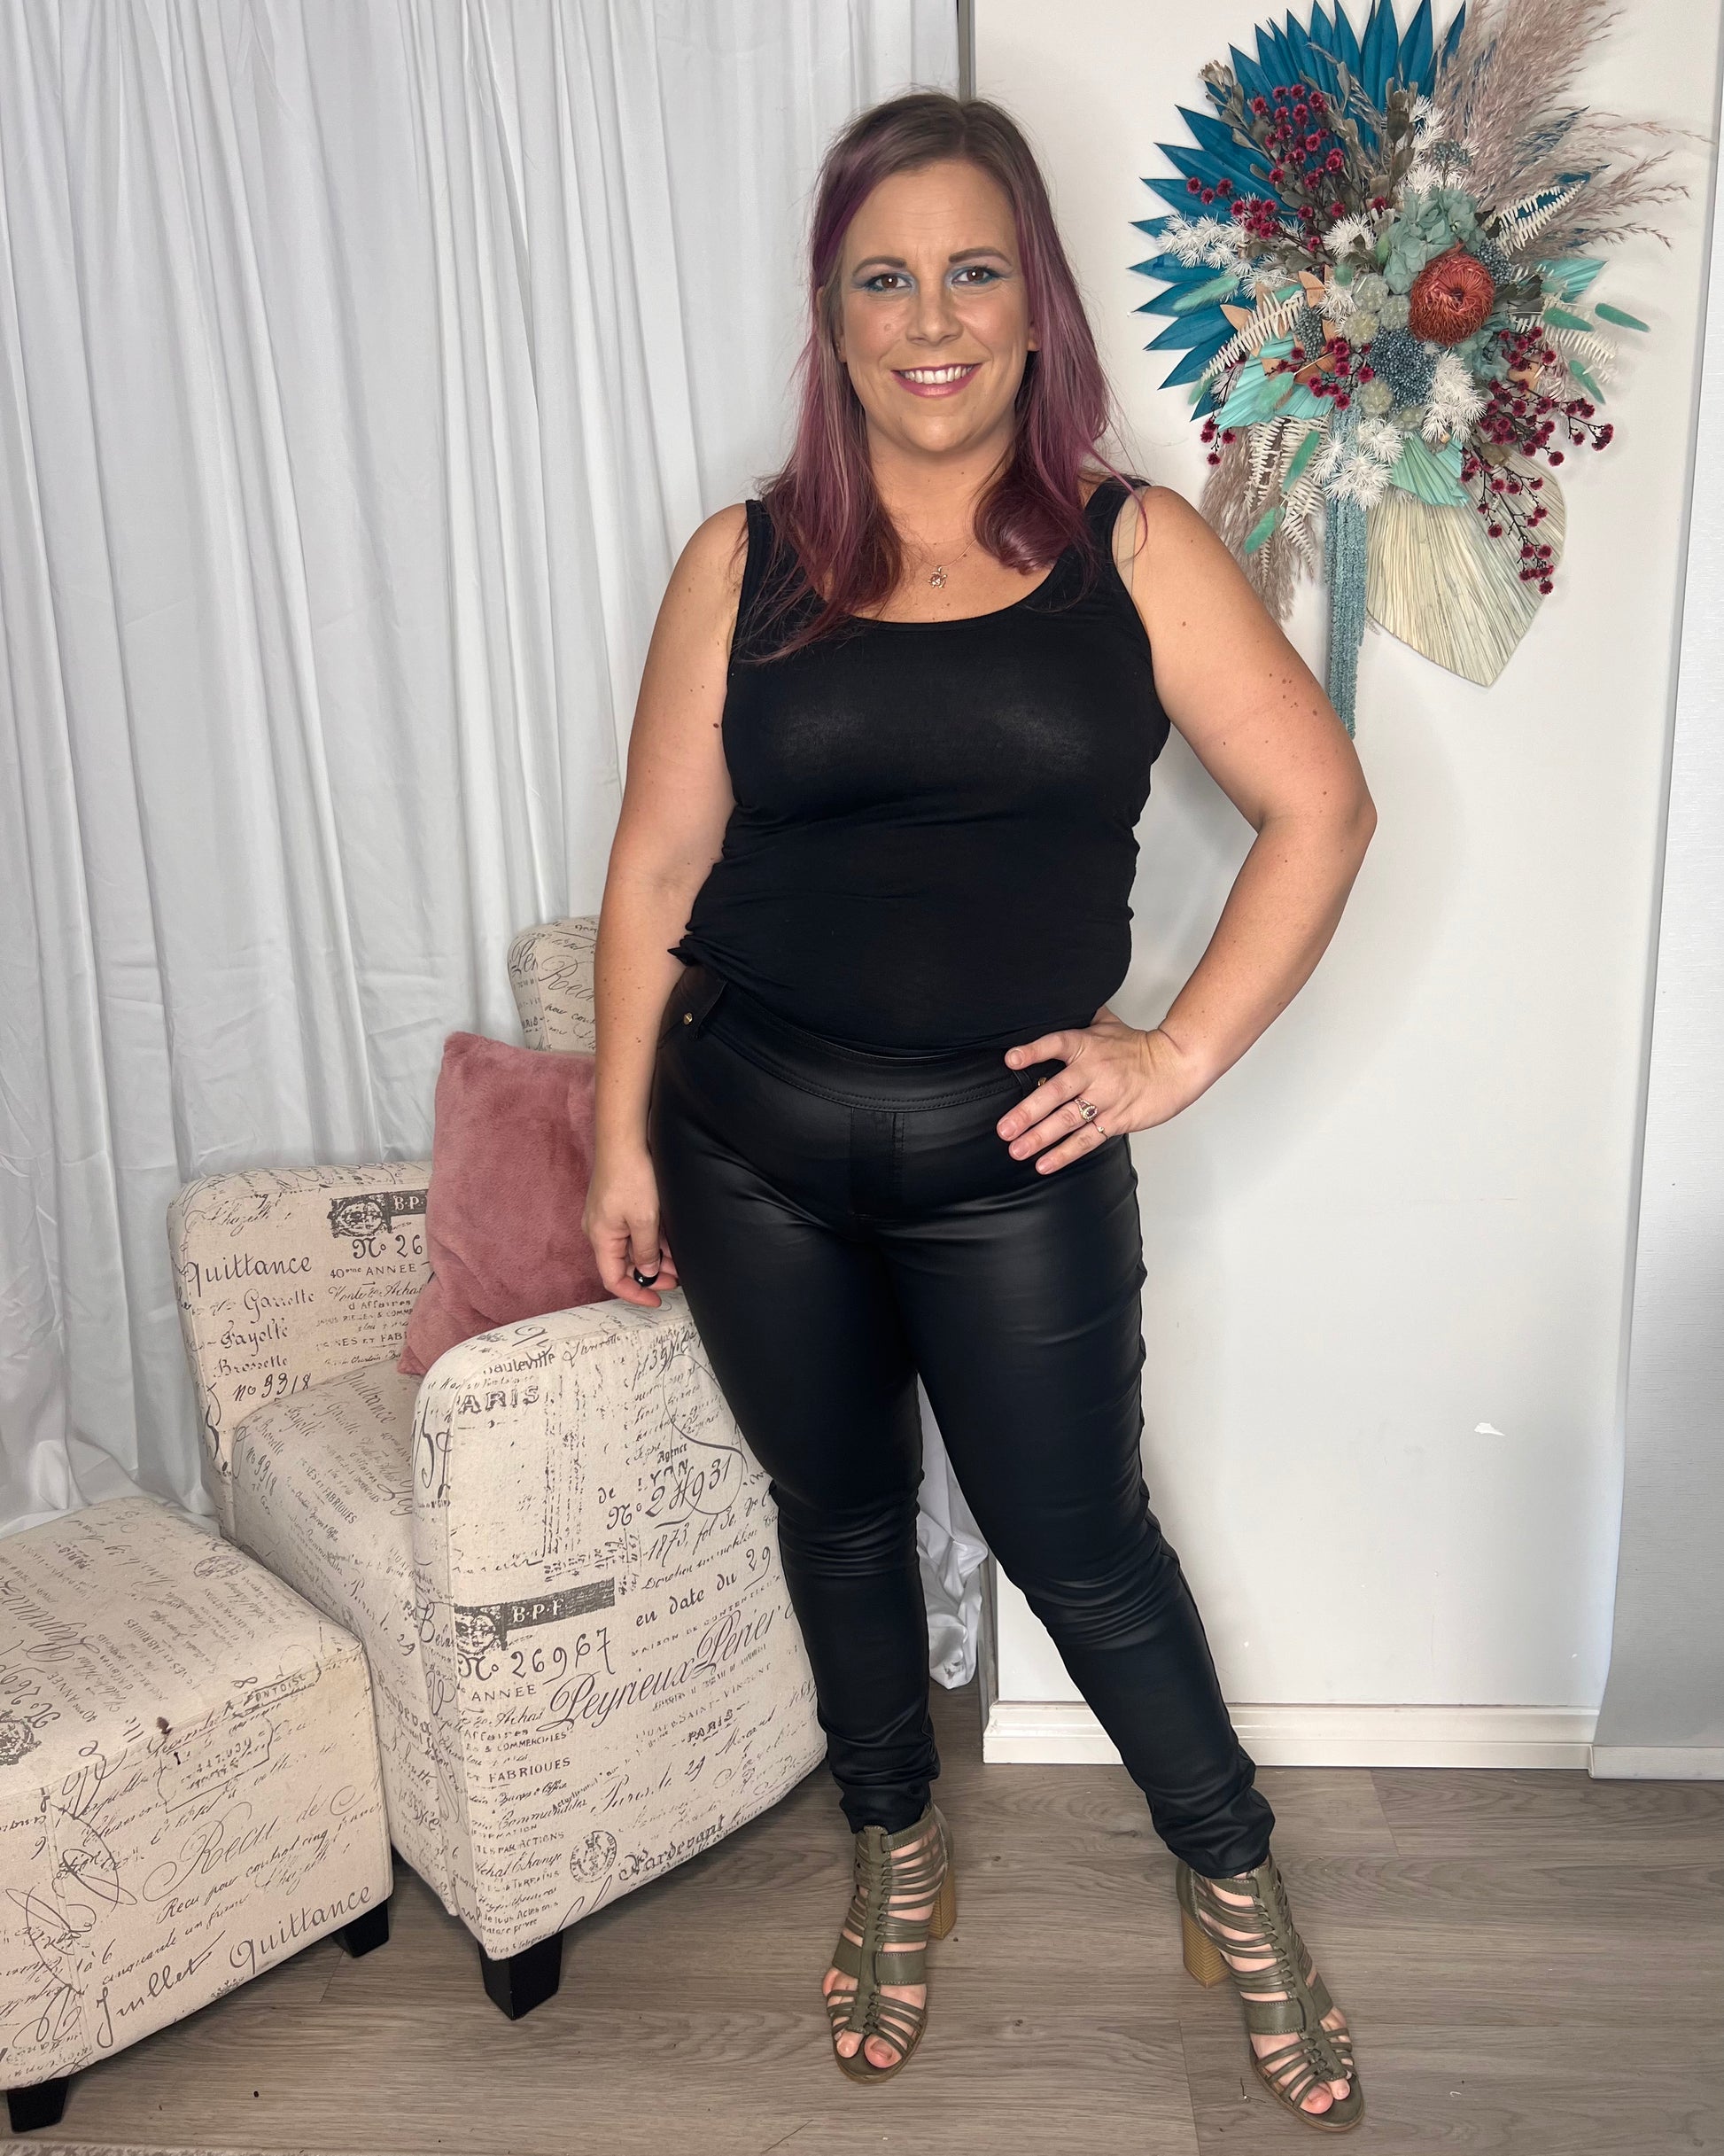 Leather Look Pants: Our "leather" wet look black pants are a new season must-have. A pull-on style pant with the comfort of a jegging but with an elevated coated finish. Style with a si - Ciao Bella Dresses 